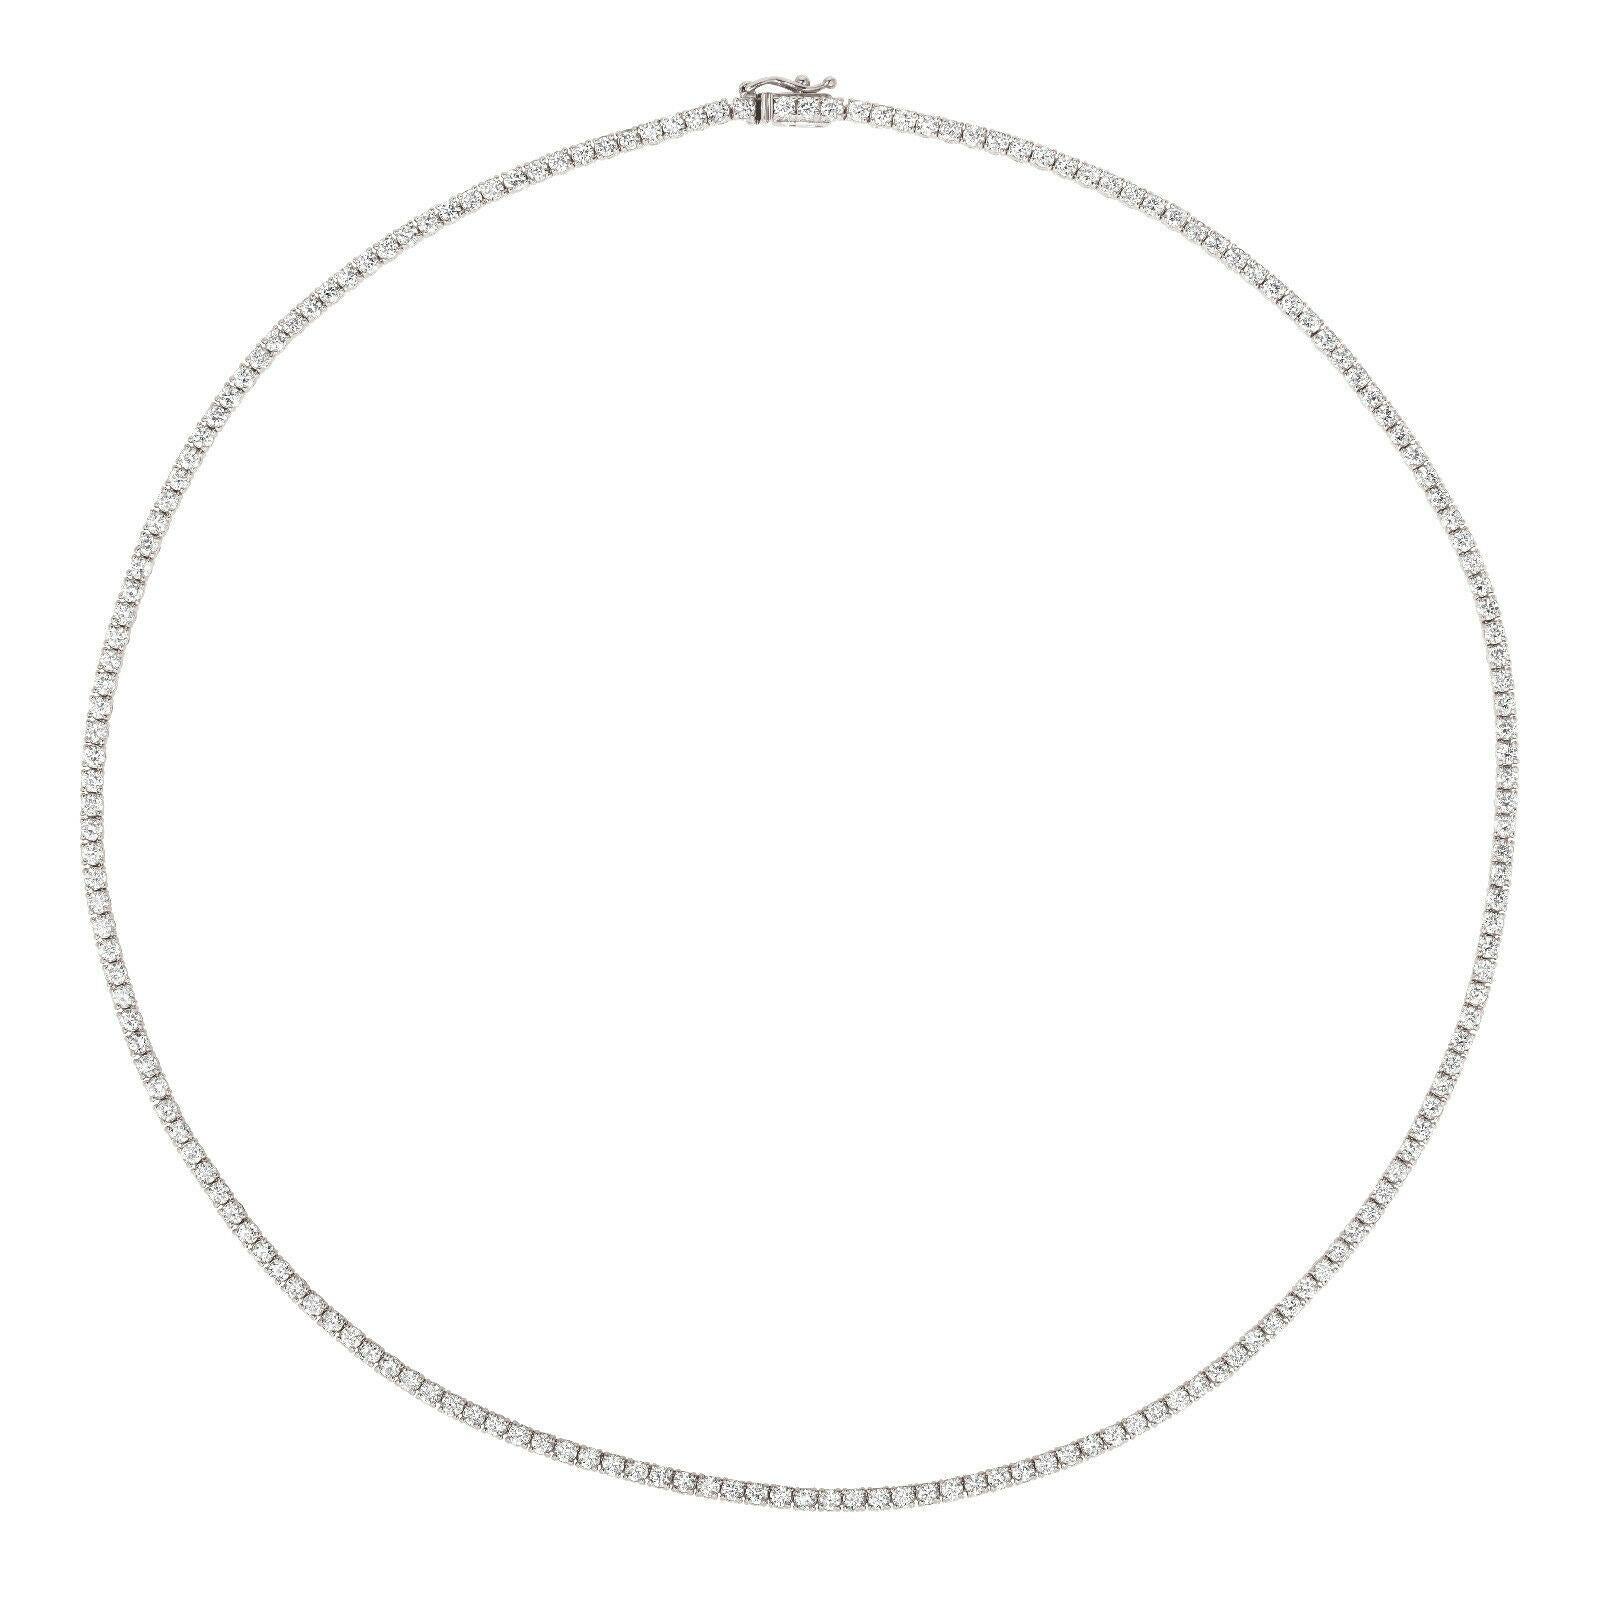 8.00 Carat Diamond Tennis Necklace G SI 14K White Gold 16 inches

100% Natural Diamonds, Not Enhanced in any way Round Cut Diamond  Necklace  
8.00CT
G-H 
SI  
14K White Gold, Pave style, 12.2 gram
16 inches in length, 1/10 inch in width
157